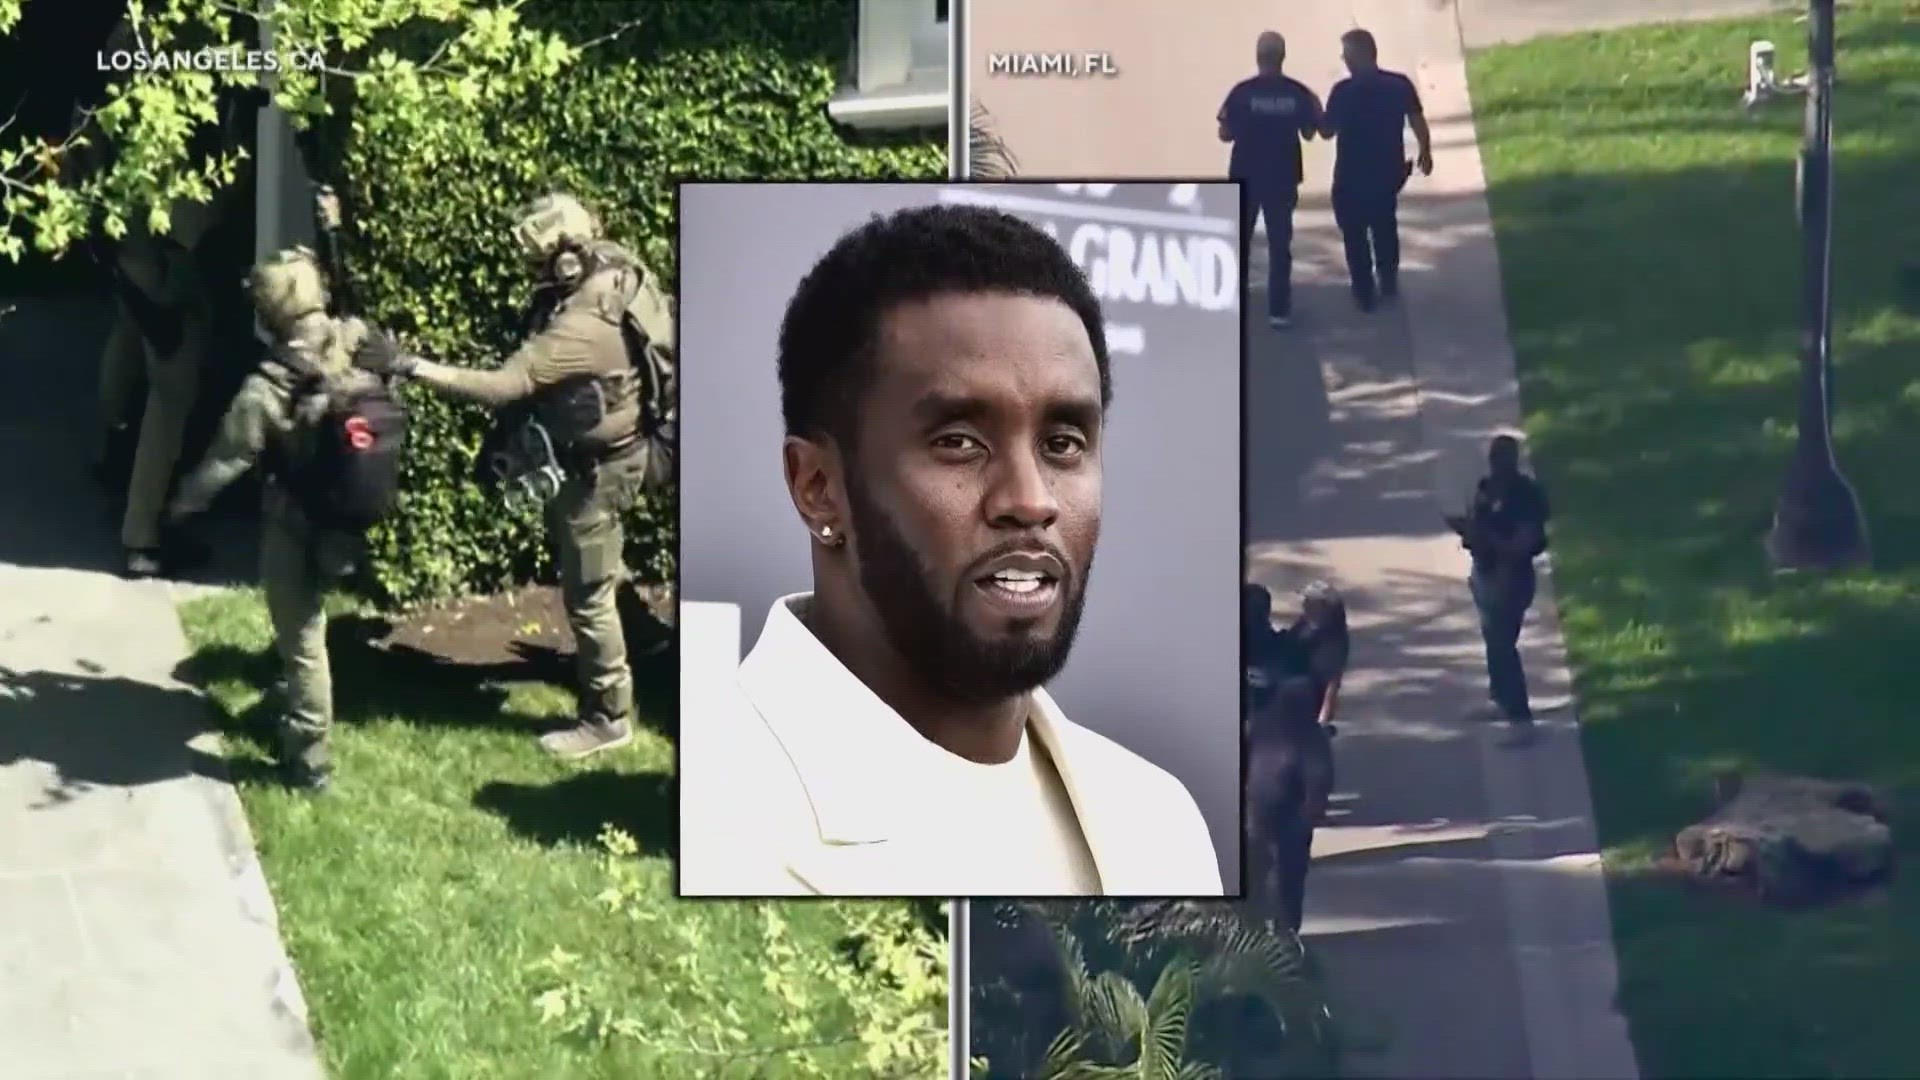 The raid of the homes of Music Mogul -- Sean Diddy Combs. This video from TMZ shows the aftermath of the search from Federal agents.